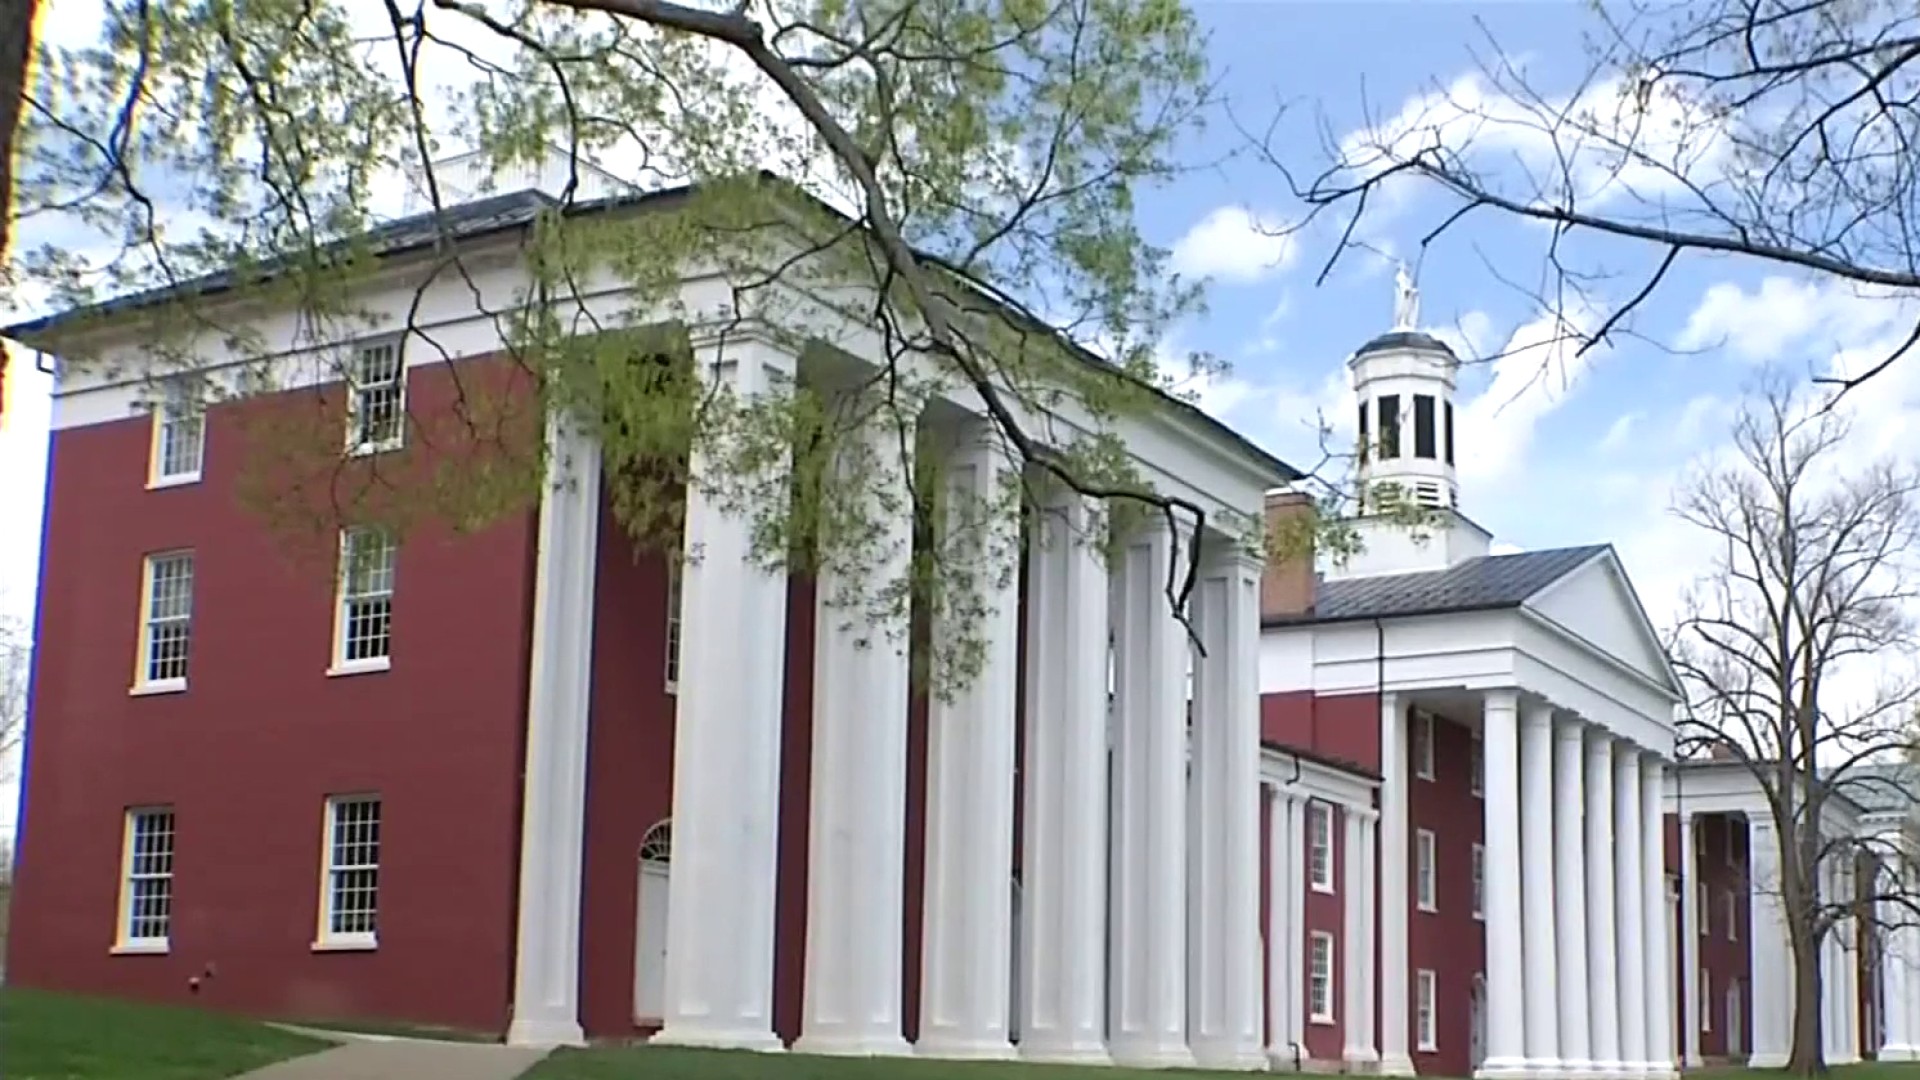 Washington and Lee University will keep its name, Lee Chapel will not